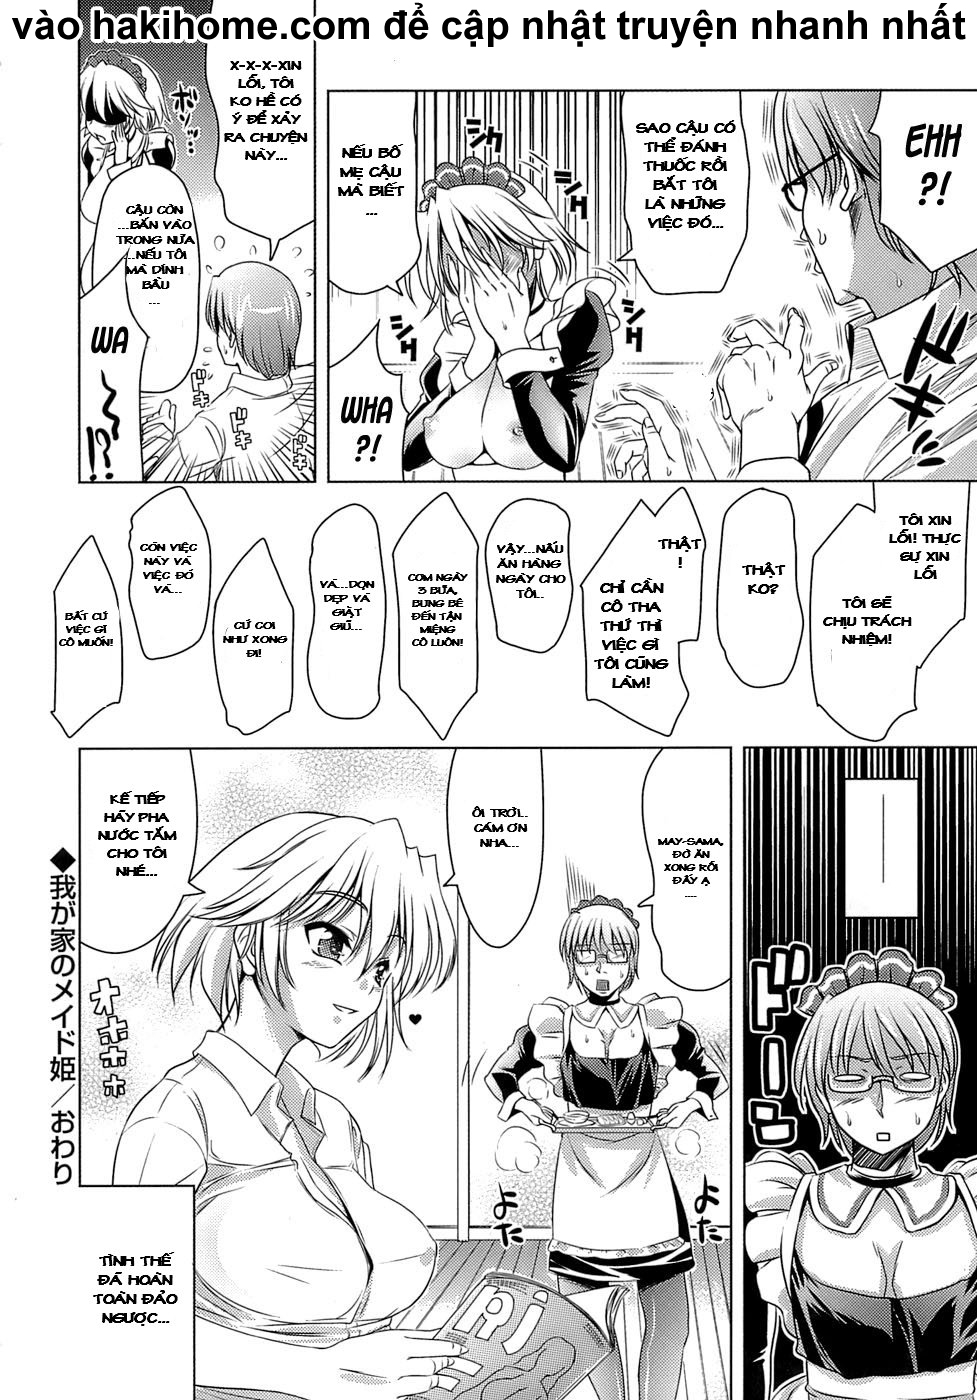 Xem ảnh Let's Fall In Love Like In An Ero-Manga - Chapter 11 END - 160454496624_0 - Hentai24h.Tv